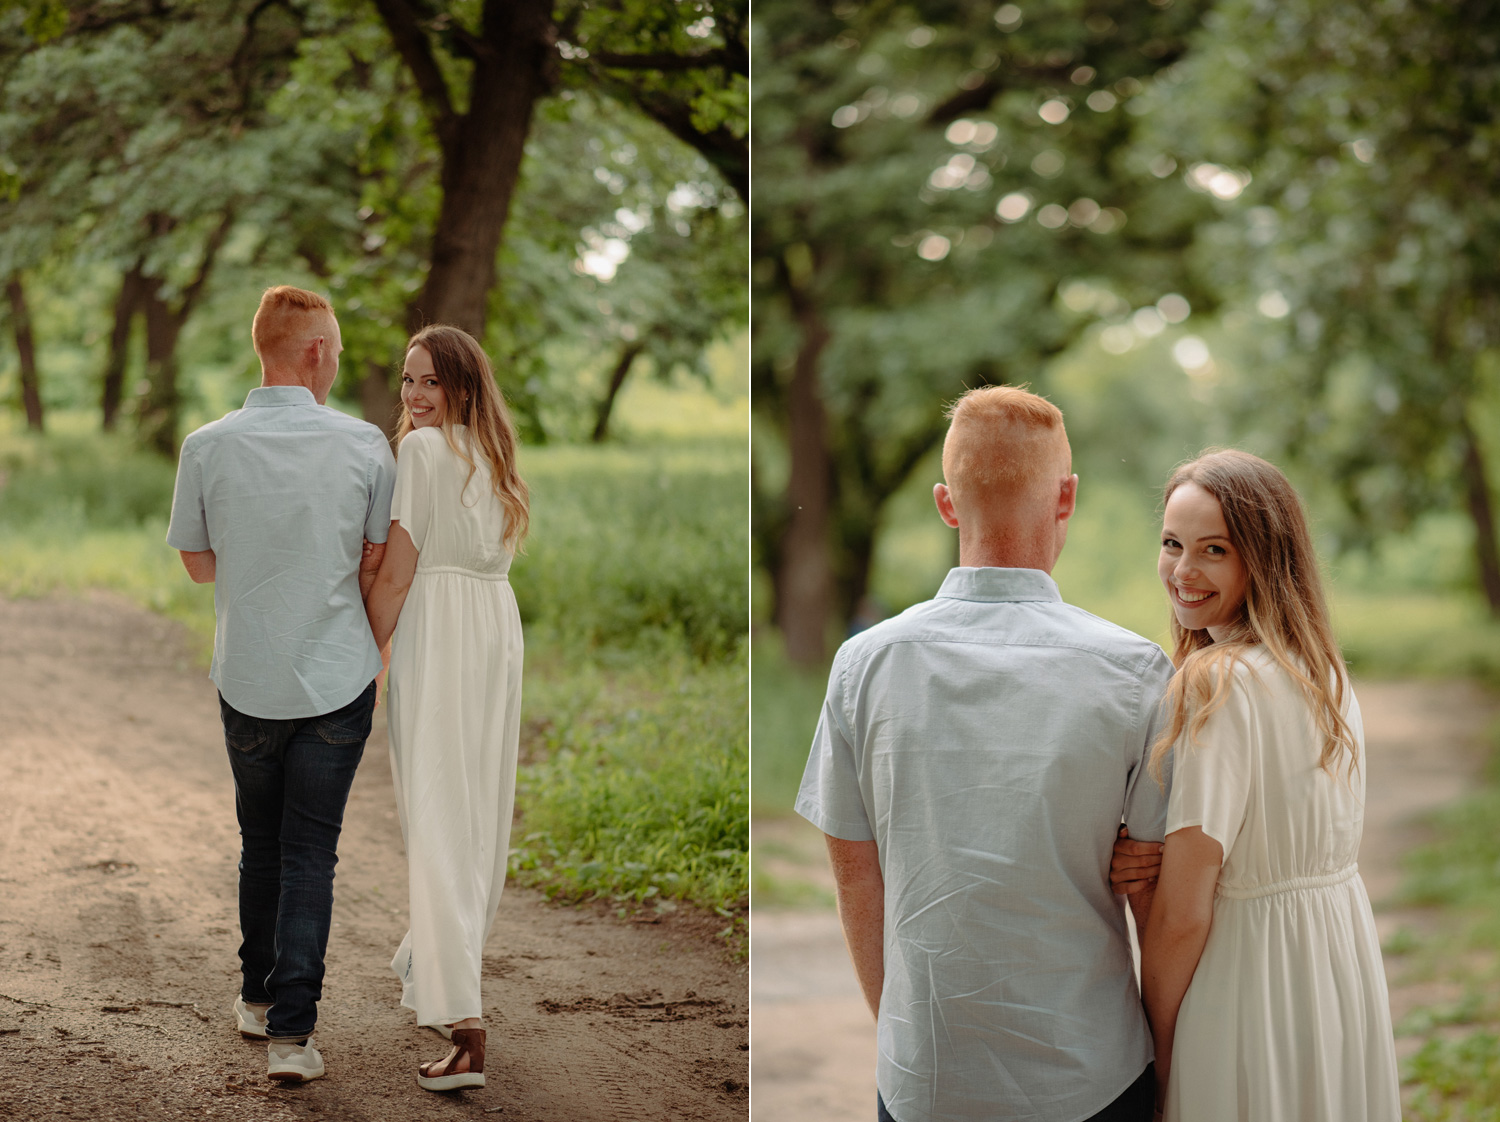 engaged couple walking away on dirt path